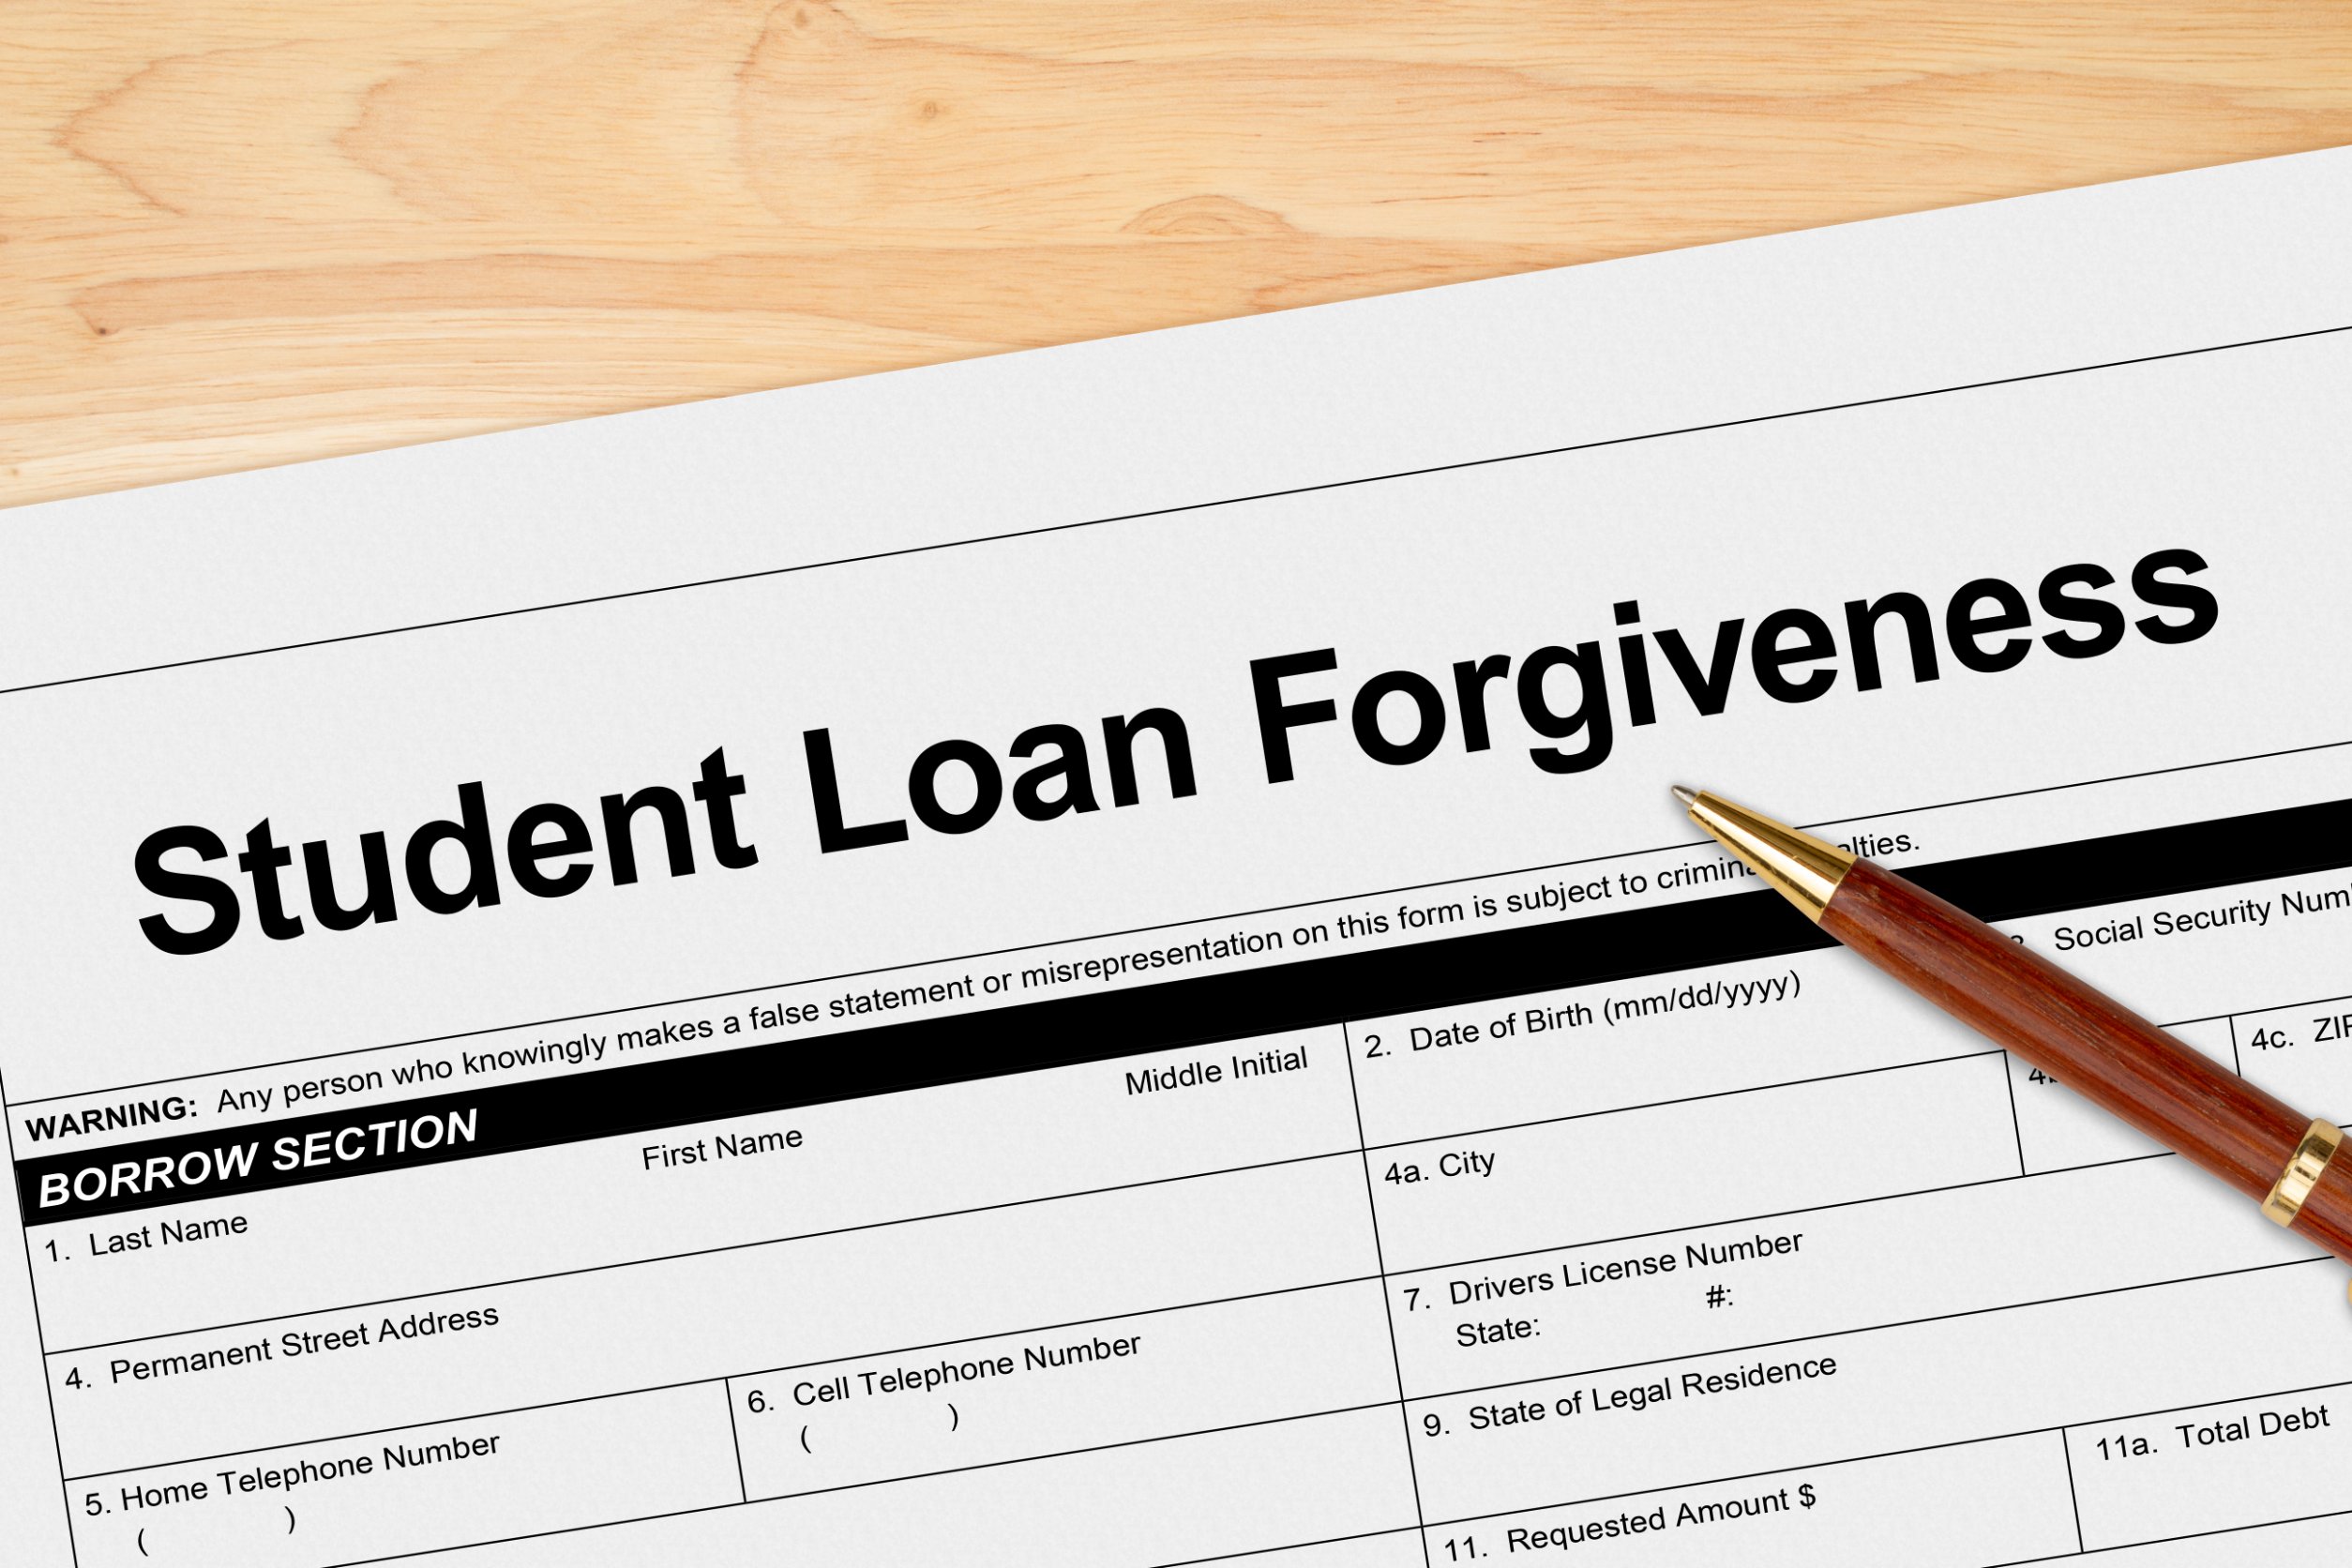 cato-institute-files-suit-against-student-loan-forgiveness-program-in